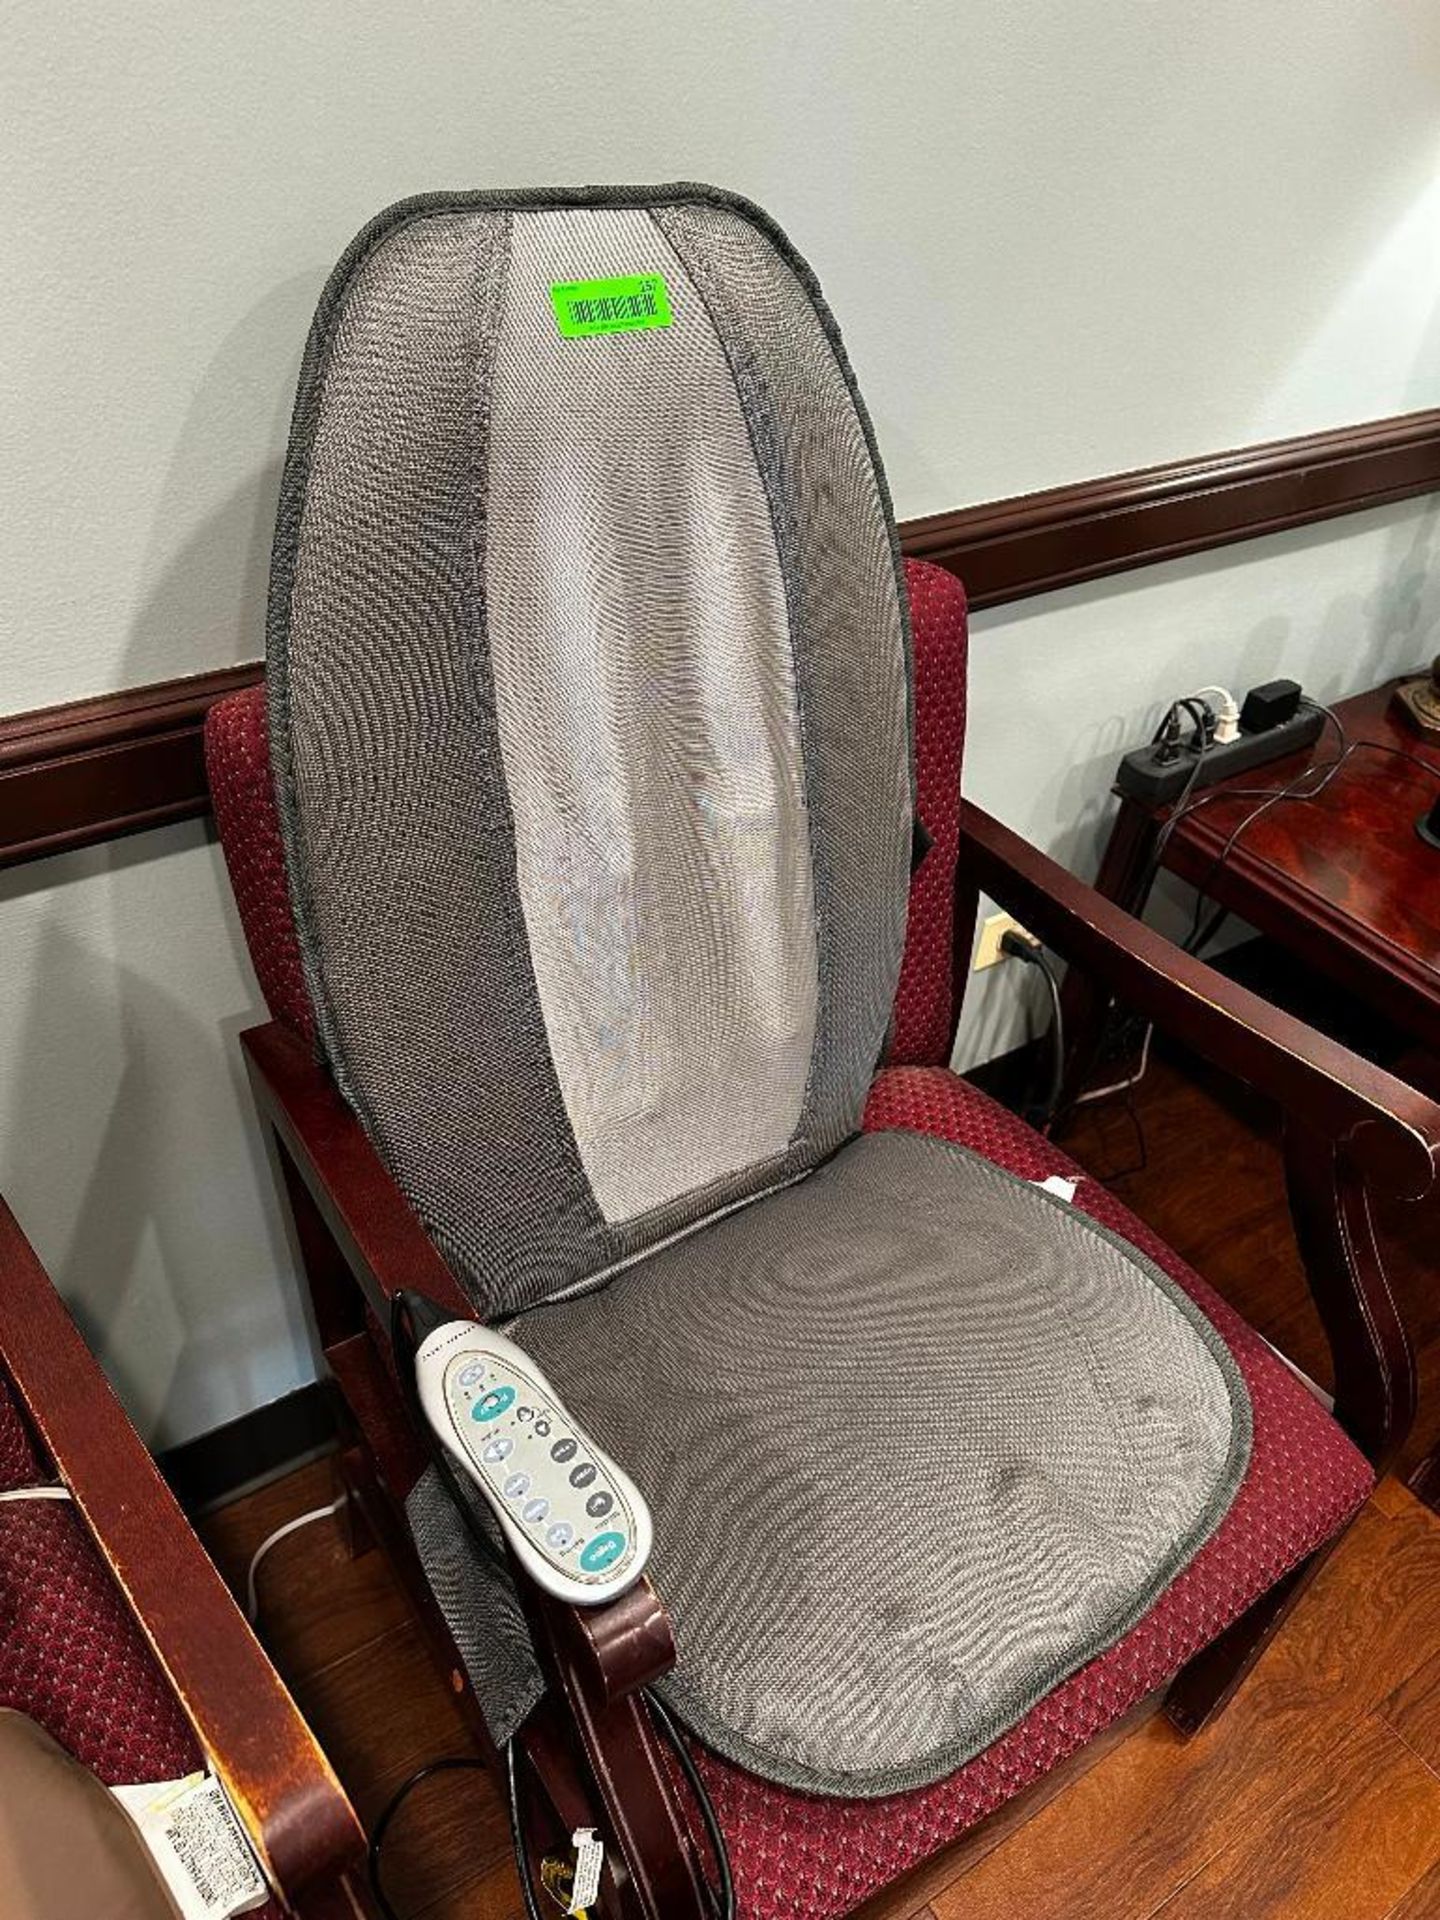 DESCRIPTION: CHAIR MASSAGER ADDITIONAL INFORMATION CHAIR NOT INCLUDED LOCATION: WAITING ROOM QTY: 1